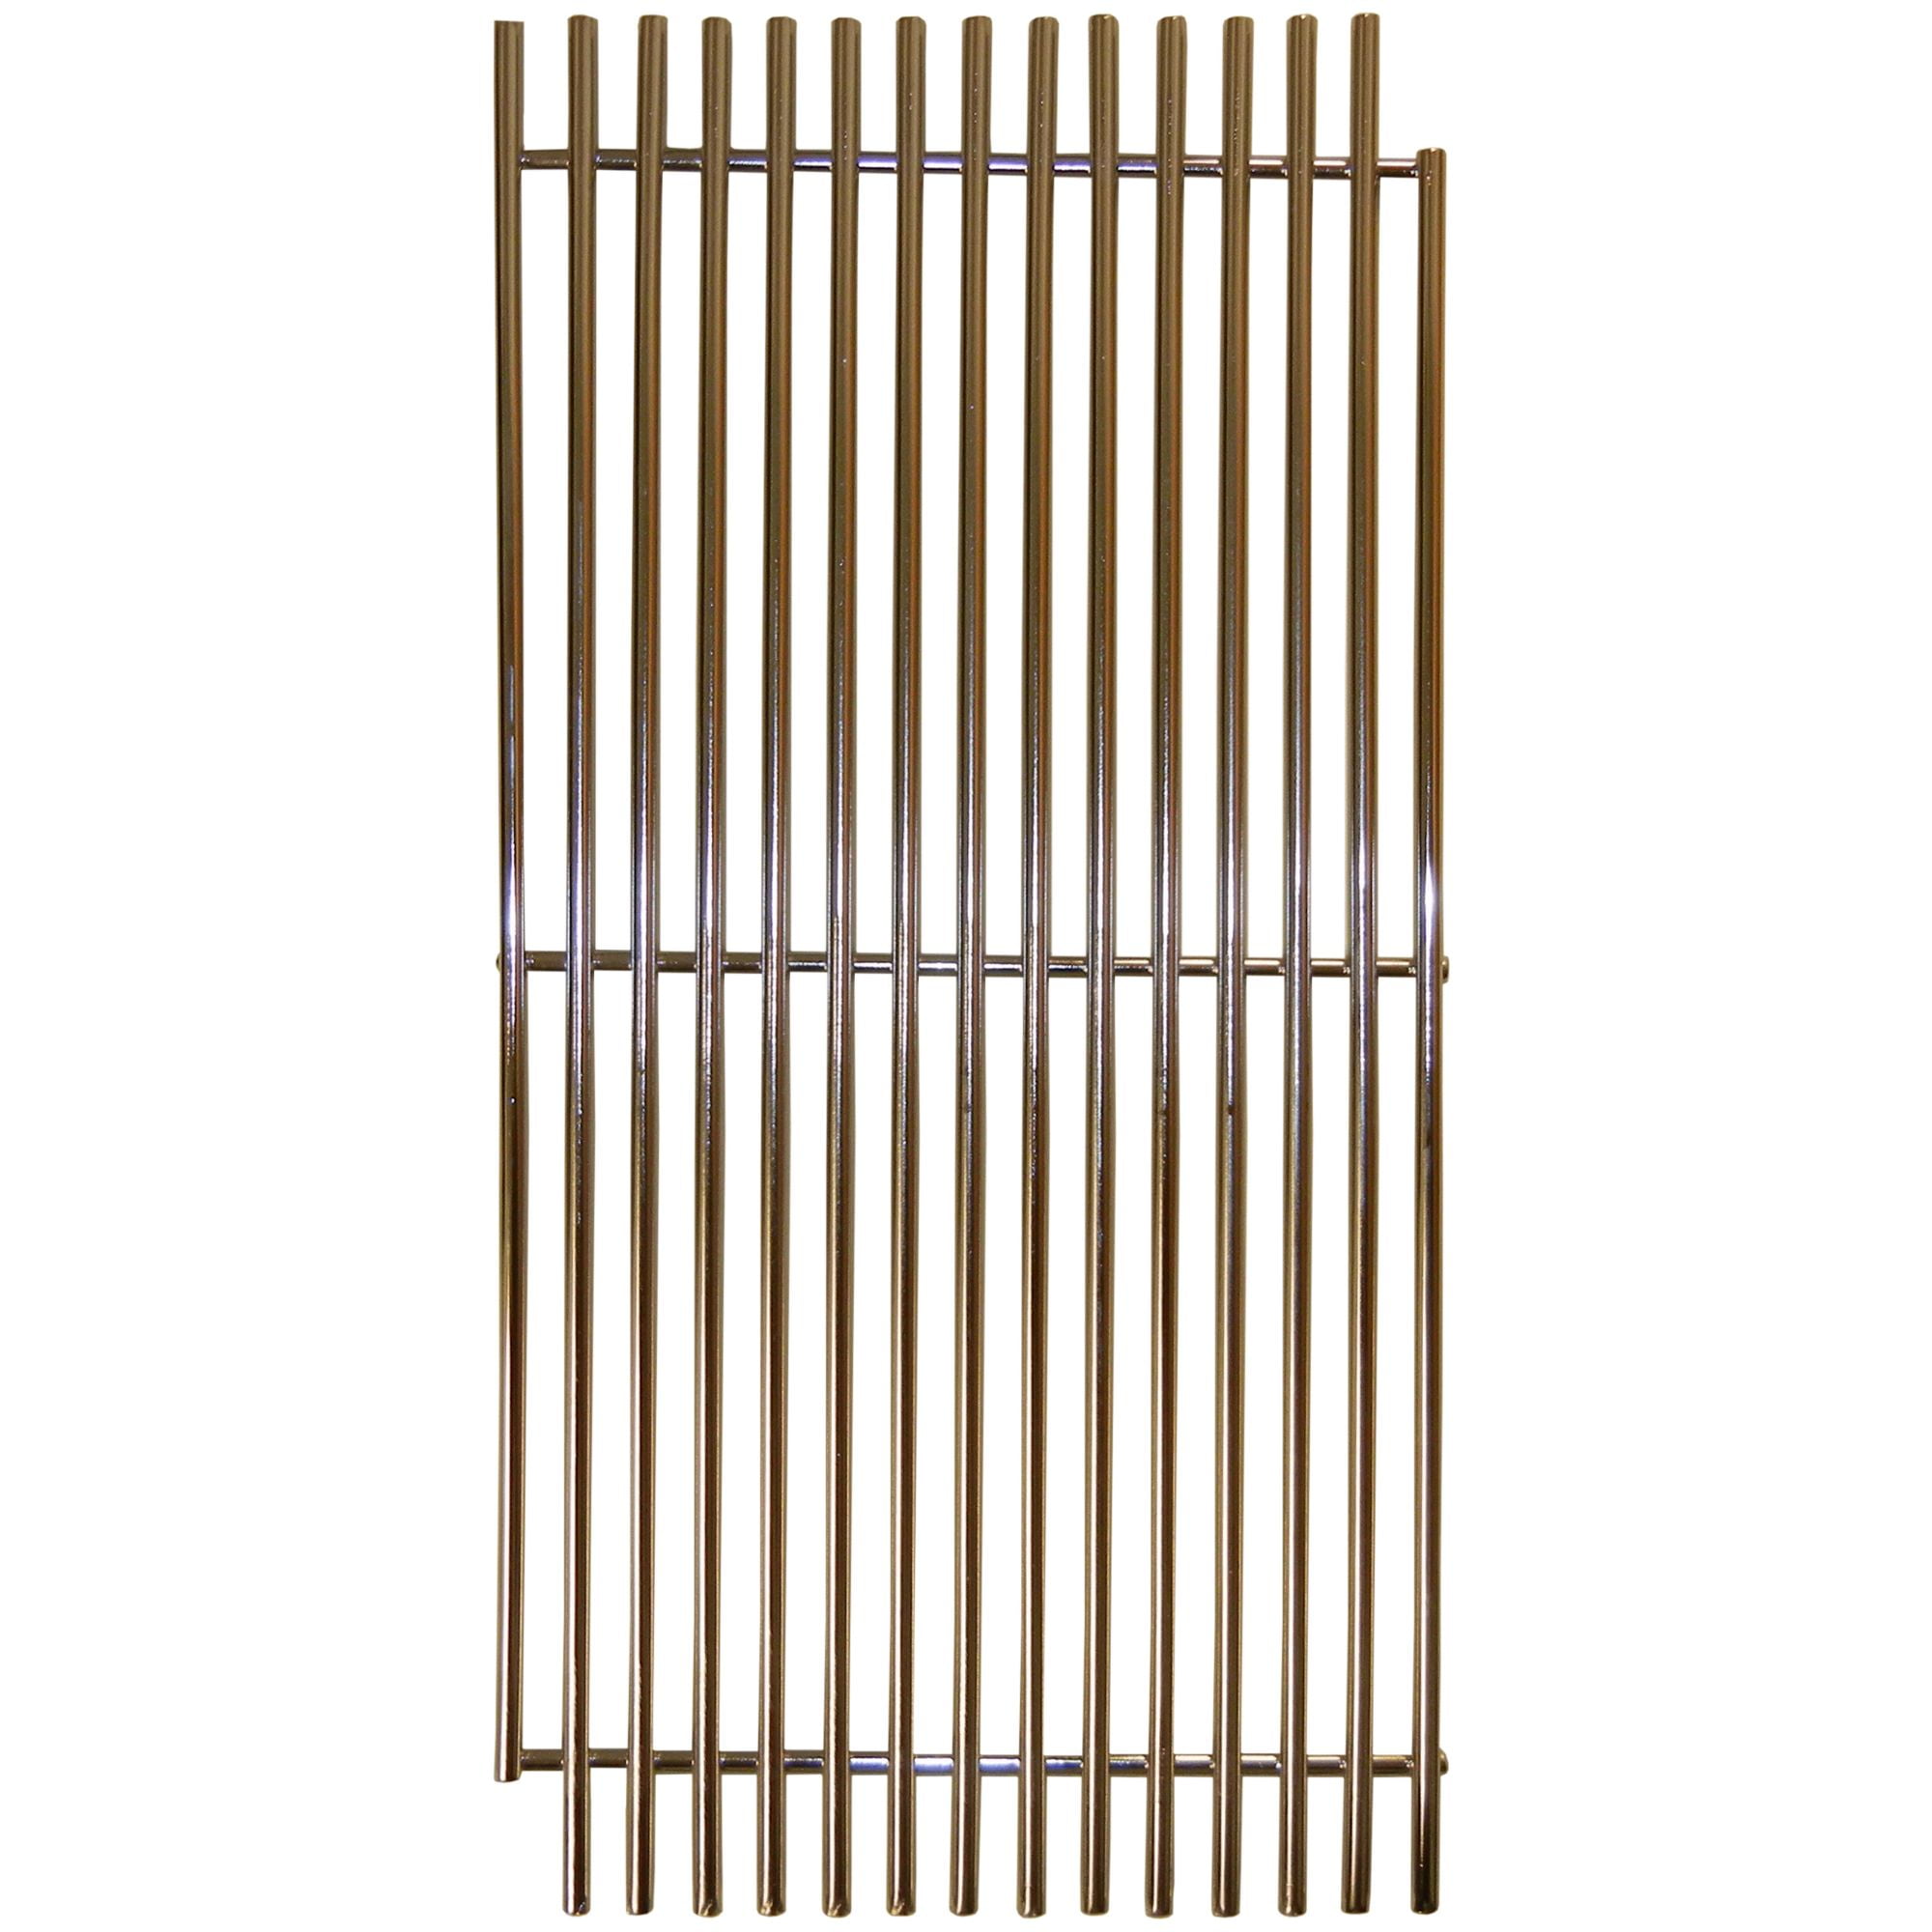 Stainless steel wire cooking grid for DCS brand gas grills